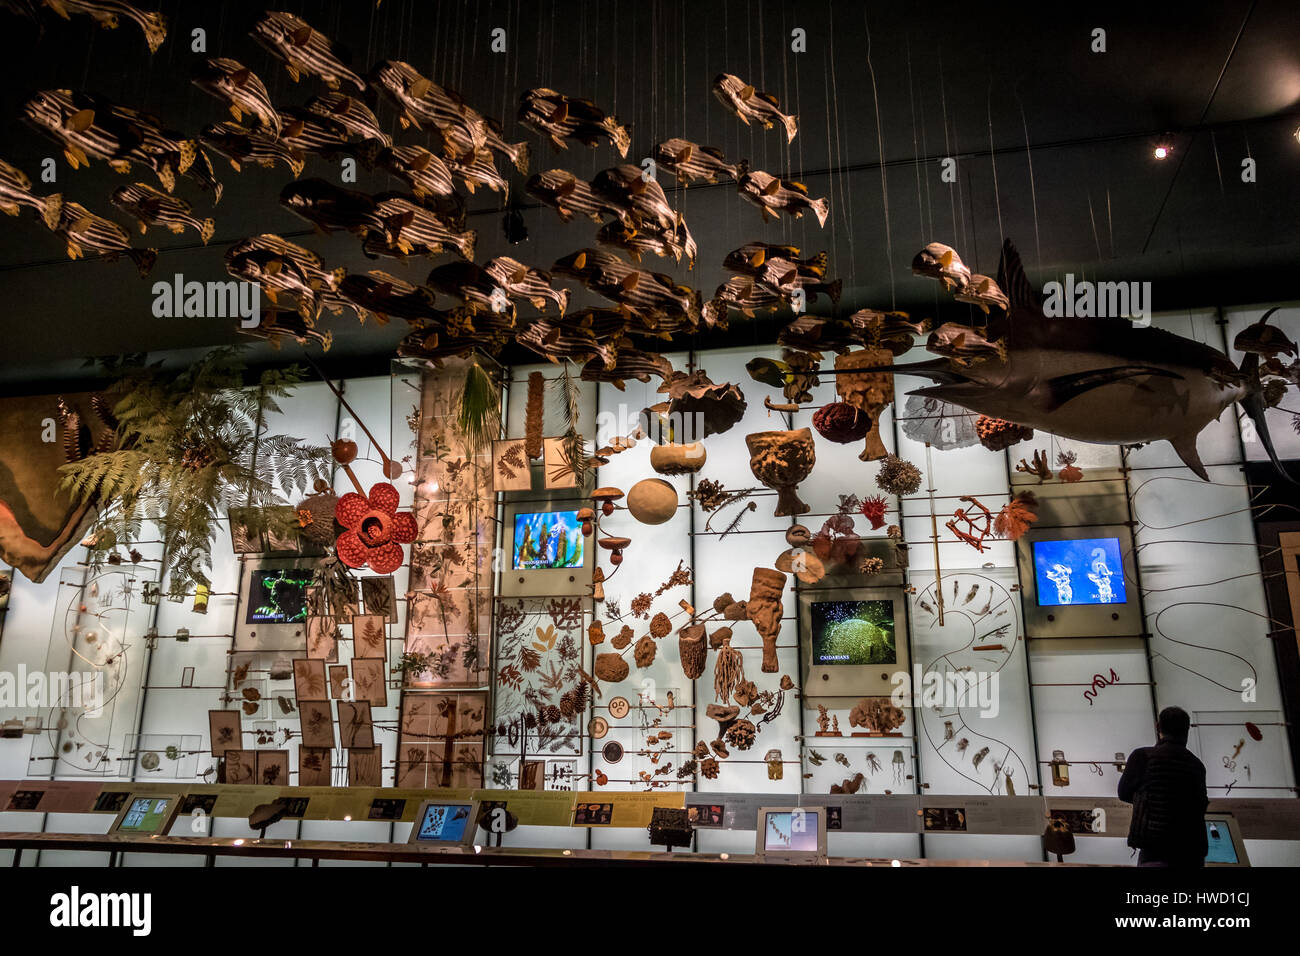 Hall of biodiversity at the American museum of Natural History (AMNH) - New York, USA Stock Photo